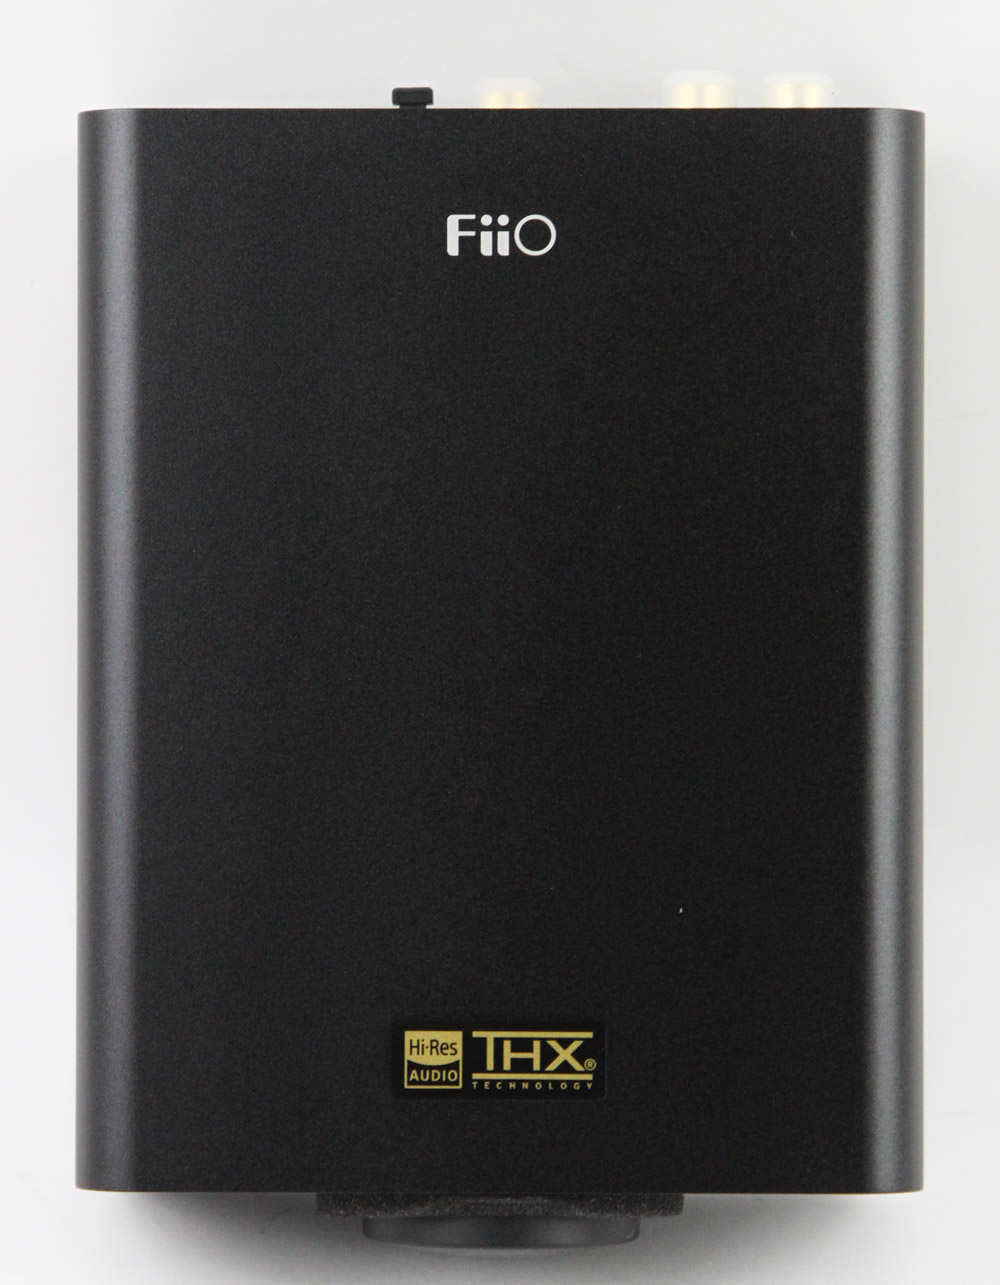 FiiO K7 - Reviews  Headphone Reviews and Discussion 